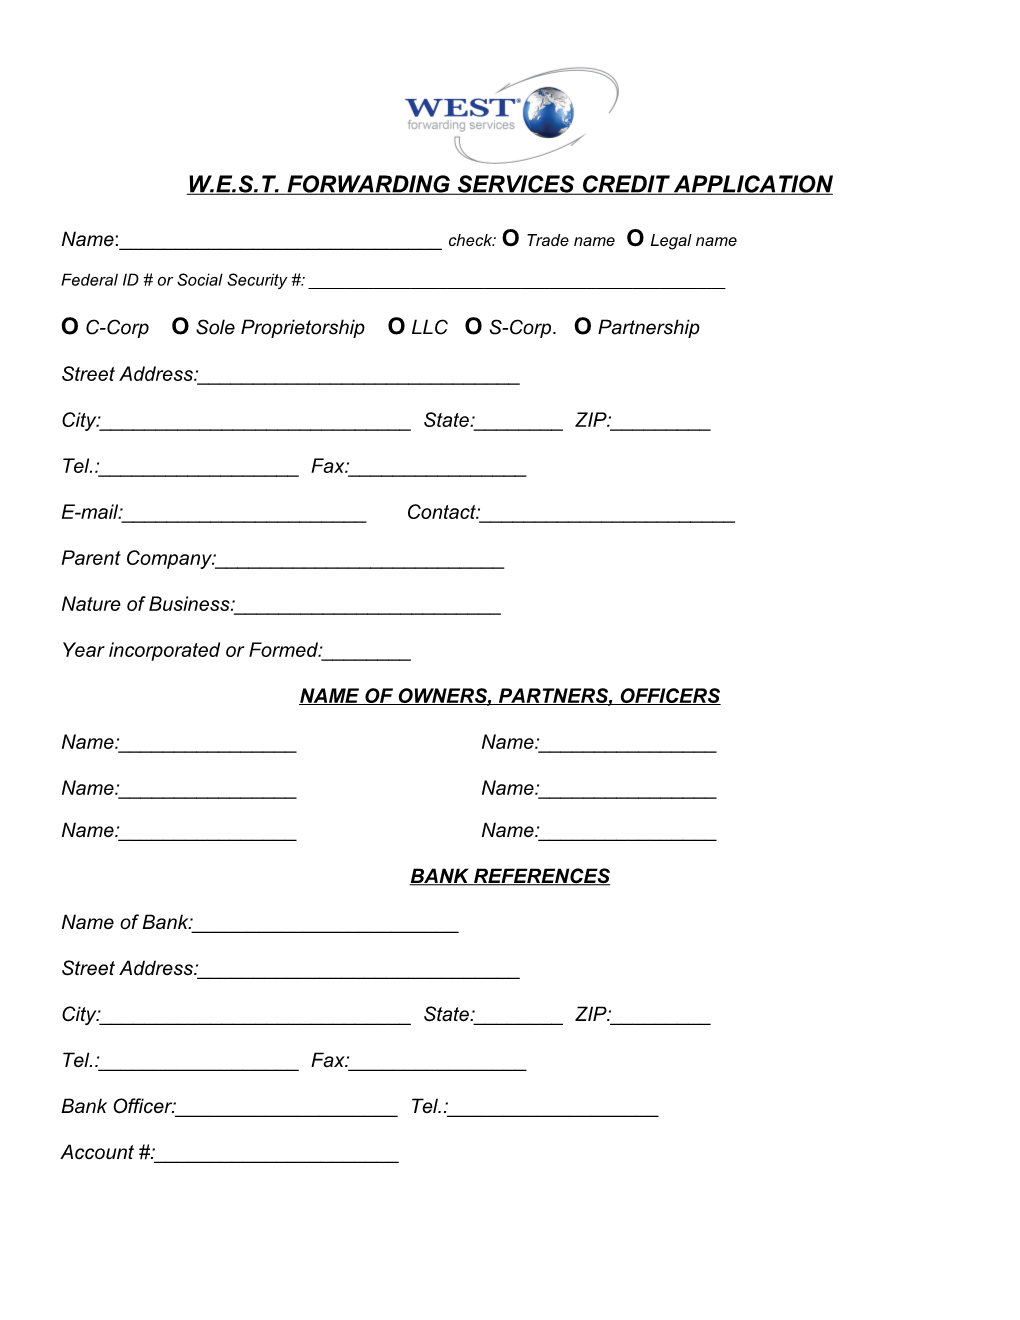 W.E.S.T. Forwarding Services Credit Application